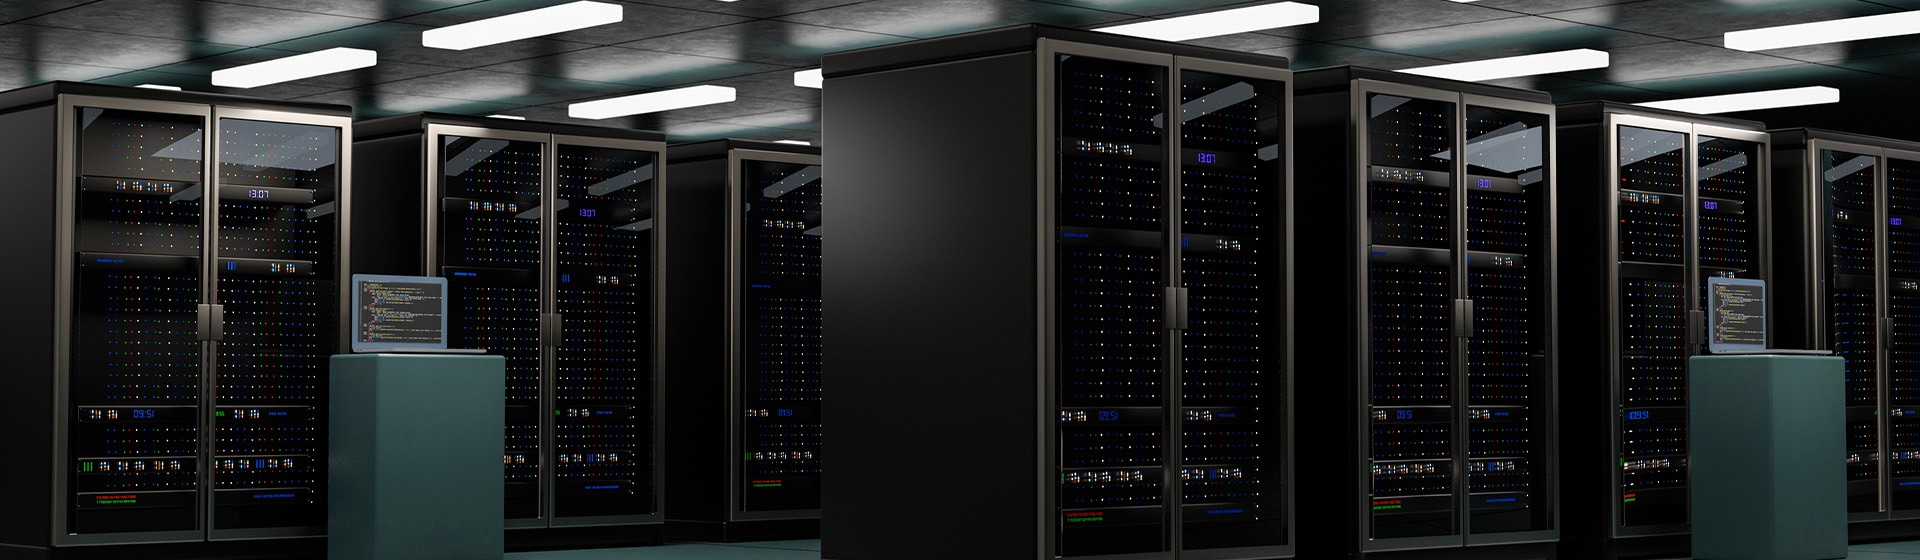 Data Protection in the Data Center: Best Practices